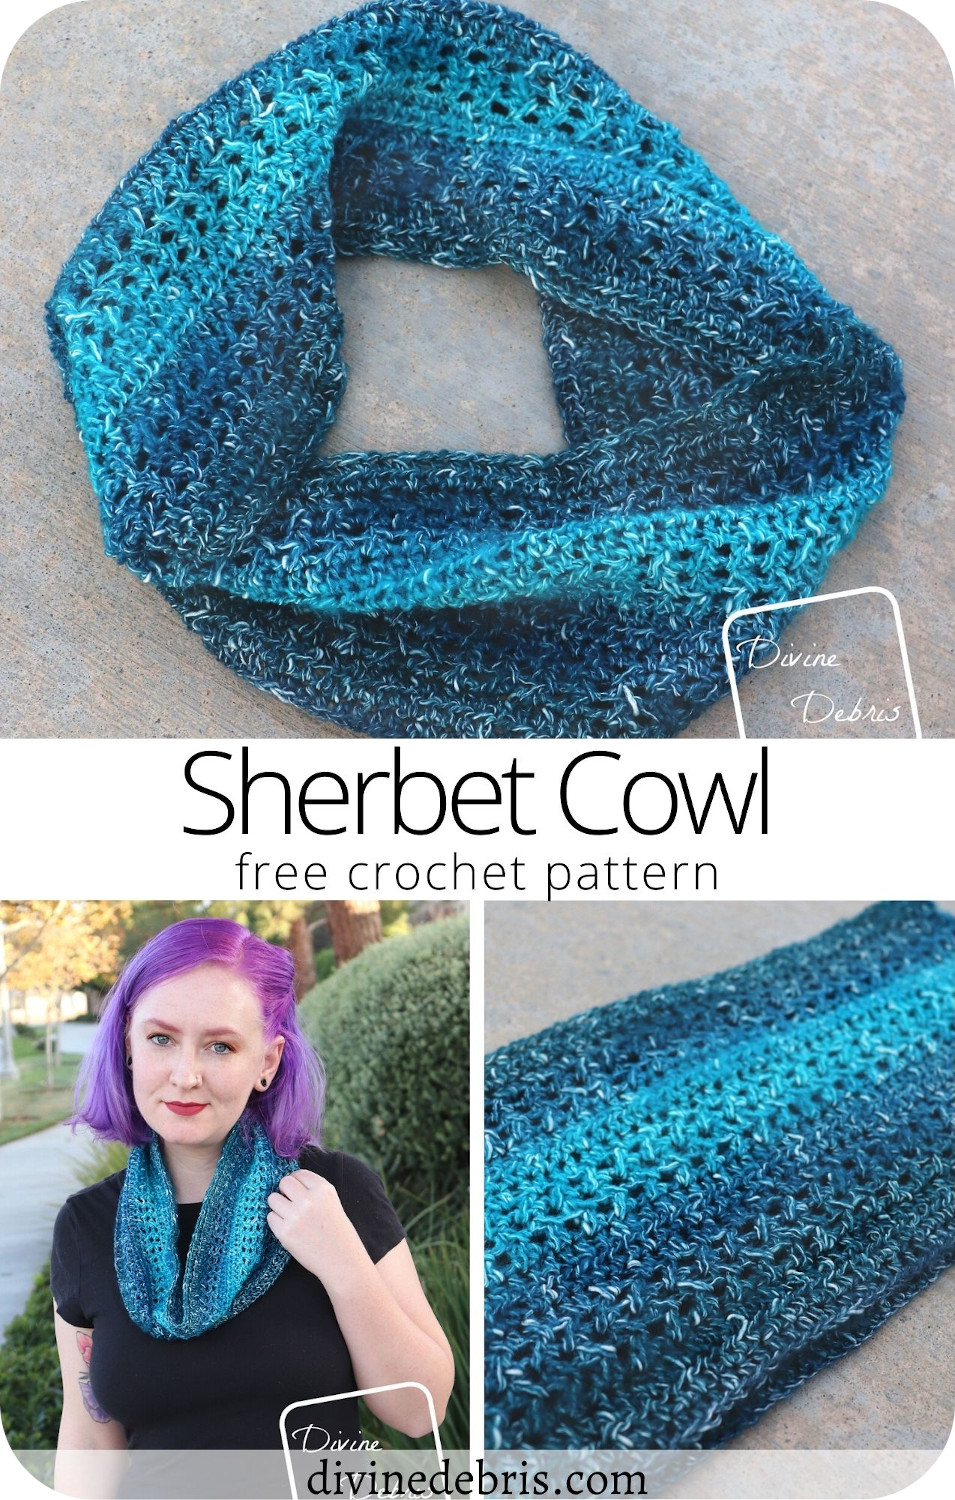 Never be without a quick gift with the fun and easy scarf for every season, the Sherbet Cowl free crochet pattern on DivineDebris.com.